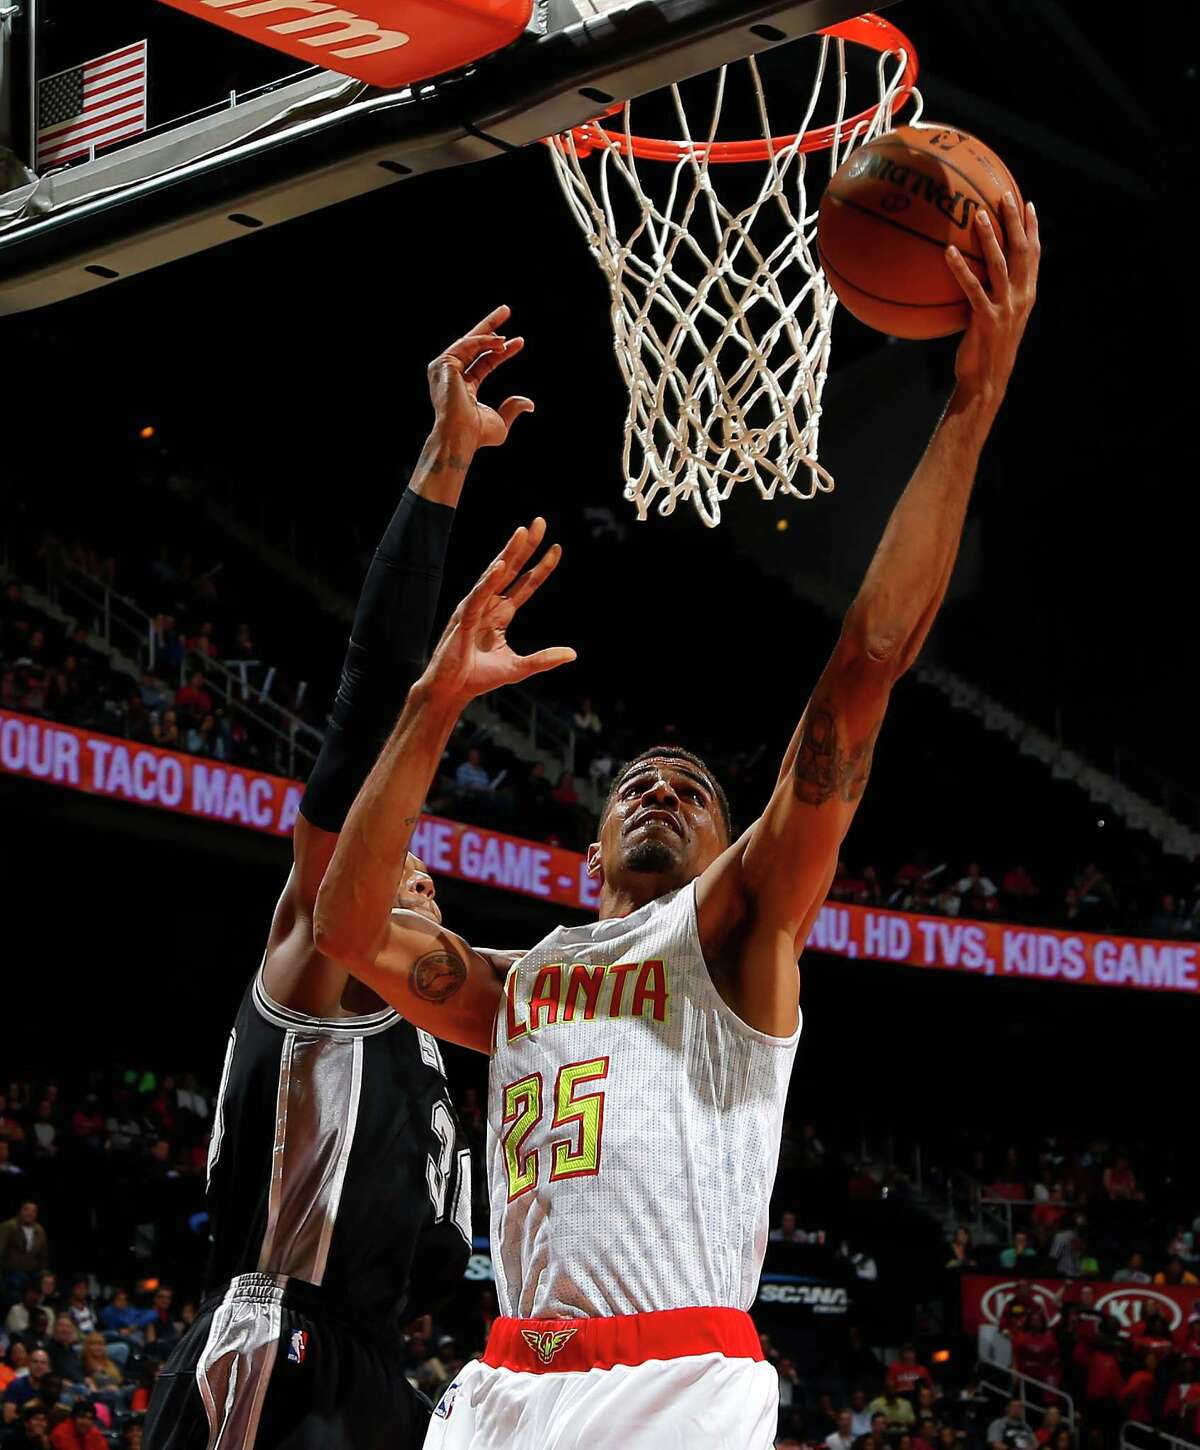 ATLANTA, GA - OCTOBER 14: Thabo Sefolosha #25 of the Atlanta Hawks lays in a basket against David West #30 of the San Antonio Spurs at Philips Arena on October 14, 2015 in Atlanta, Georgia. NOTE TO USER User expressly acknowledges and agrees that, by downloading andor using this photograph, user is consenting to the terms and conditions of the Getty Images License Agreement.